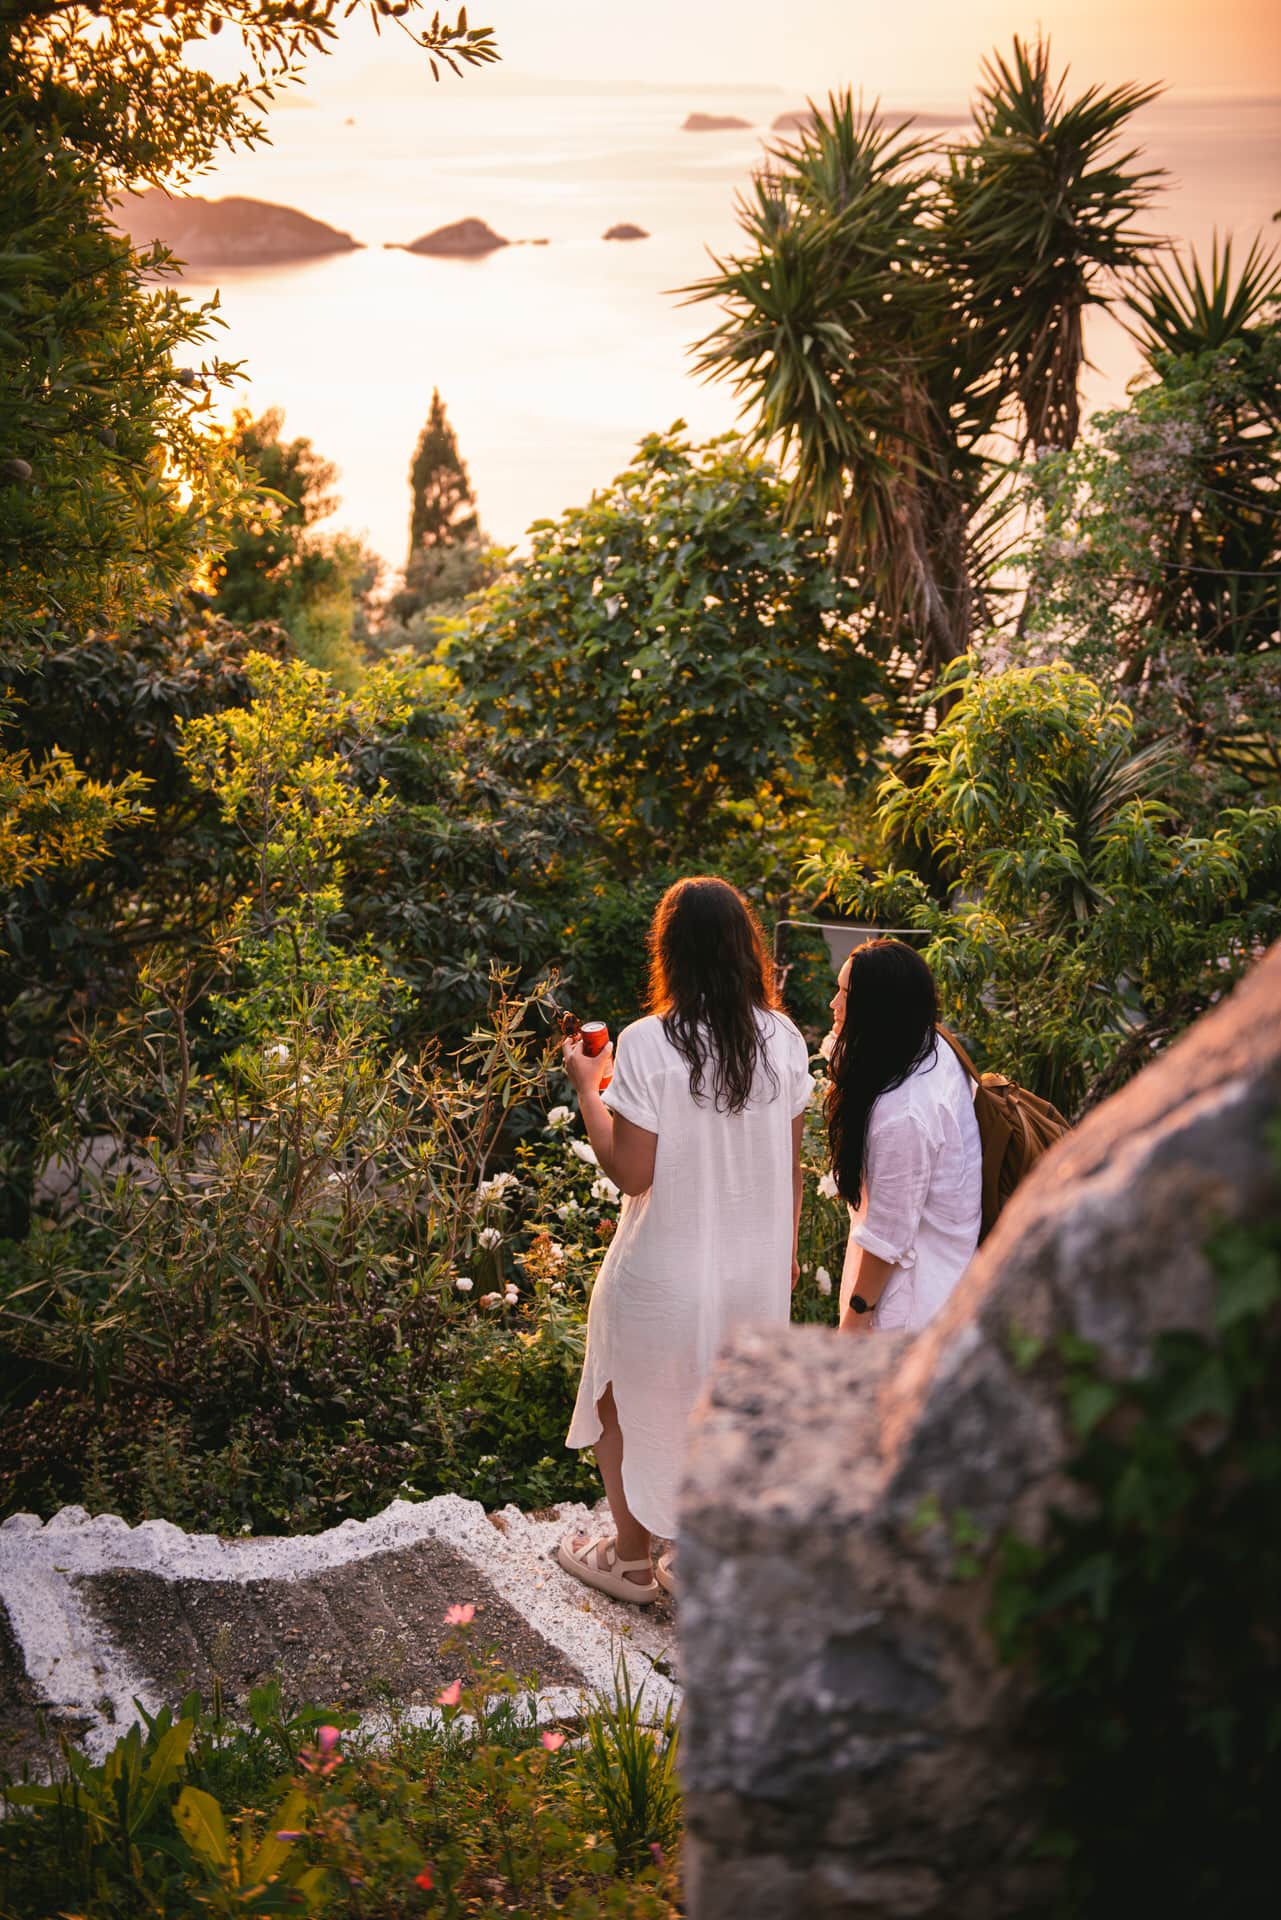 Brides enjoying the view, their connection reflected against the backdrop of a captivating Corfu sunset.